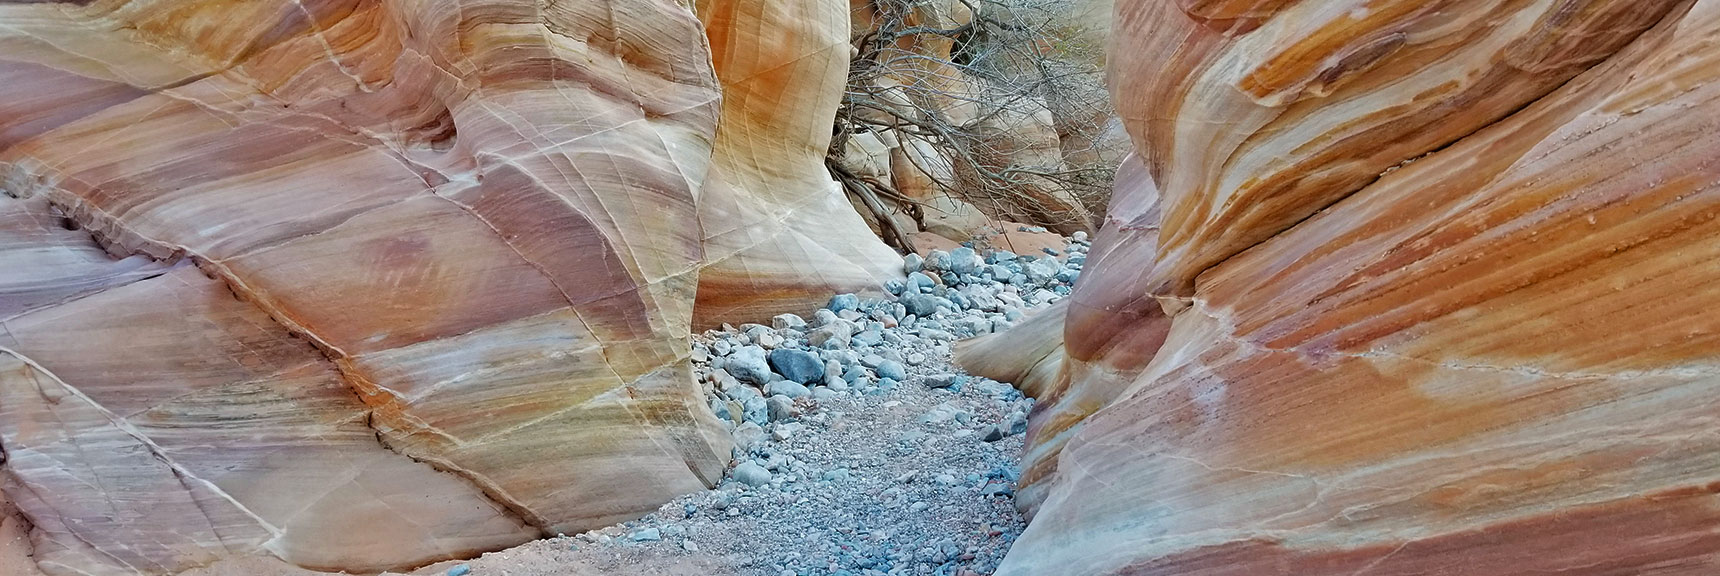 Passing Through Firewave Rocks While Descending Through the Northern Canyon Wash on Prospect Trail in Valley of Fire State Park, Nevada Prospect Trail in Valley of Fire State Park, Nevada